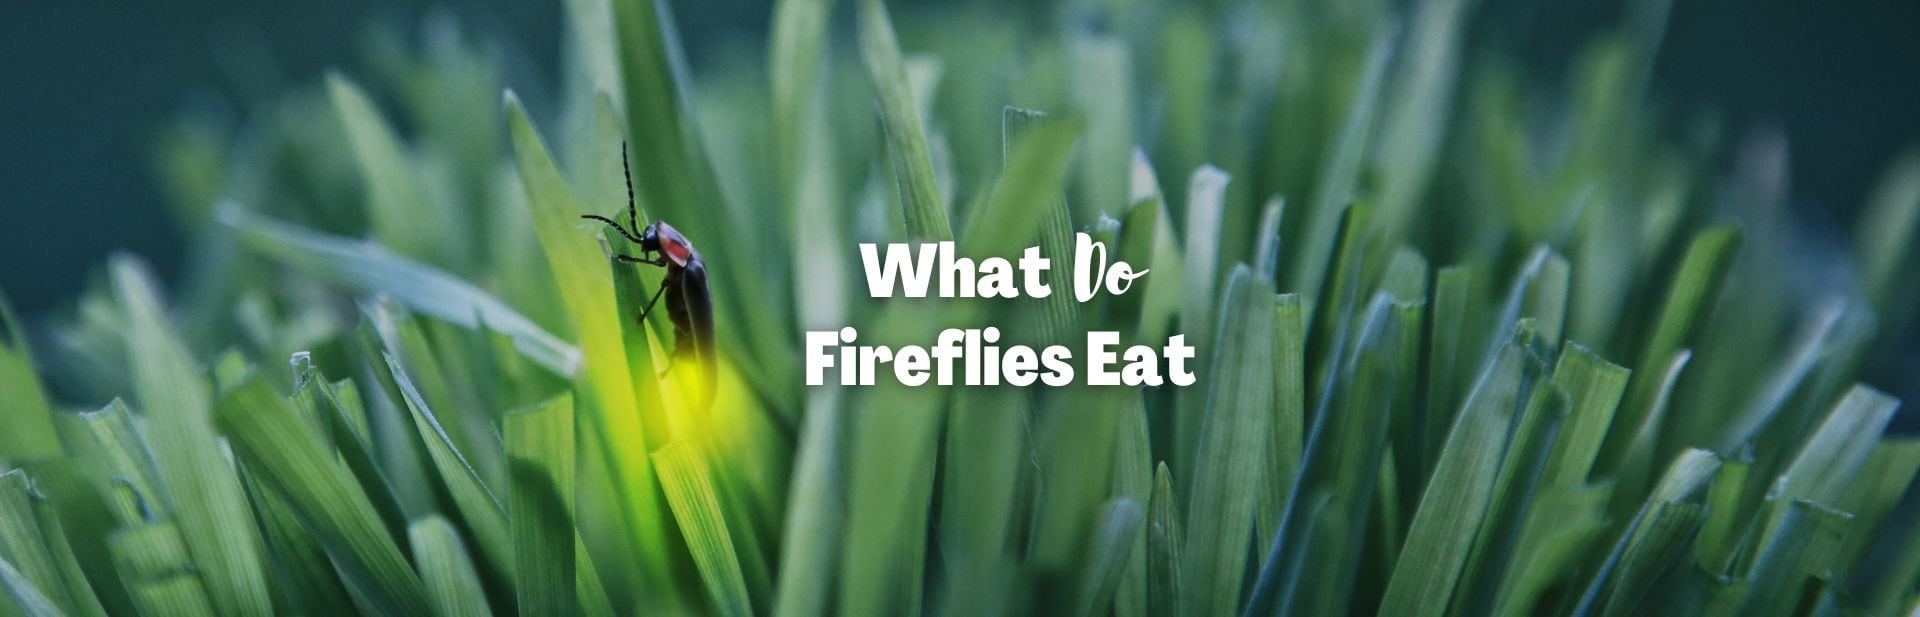 What Do Fireflies Eat? Unveiling the Sparkling Truth